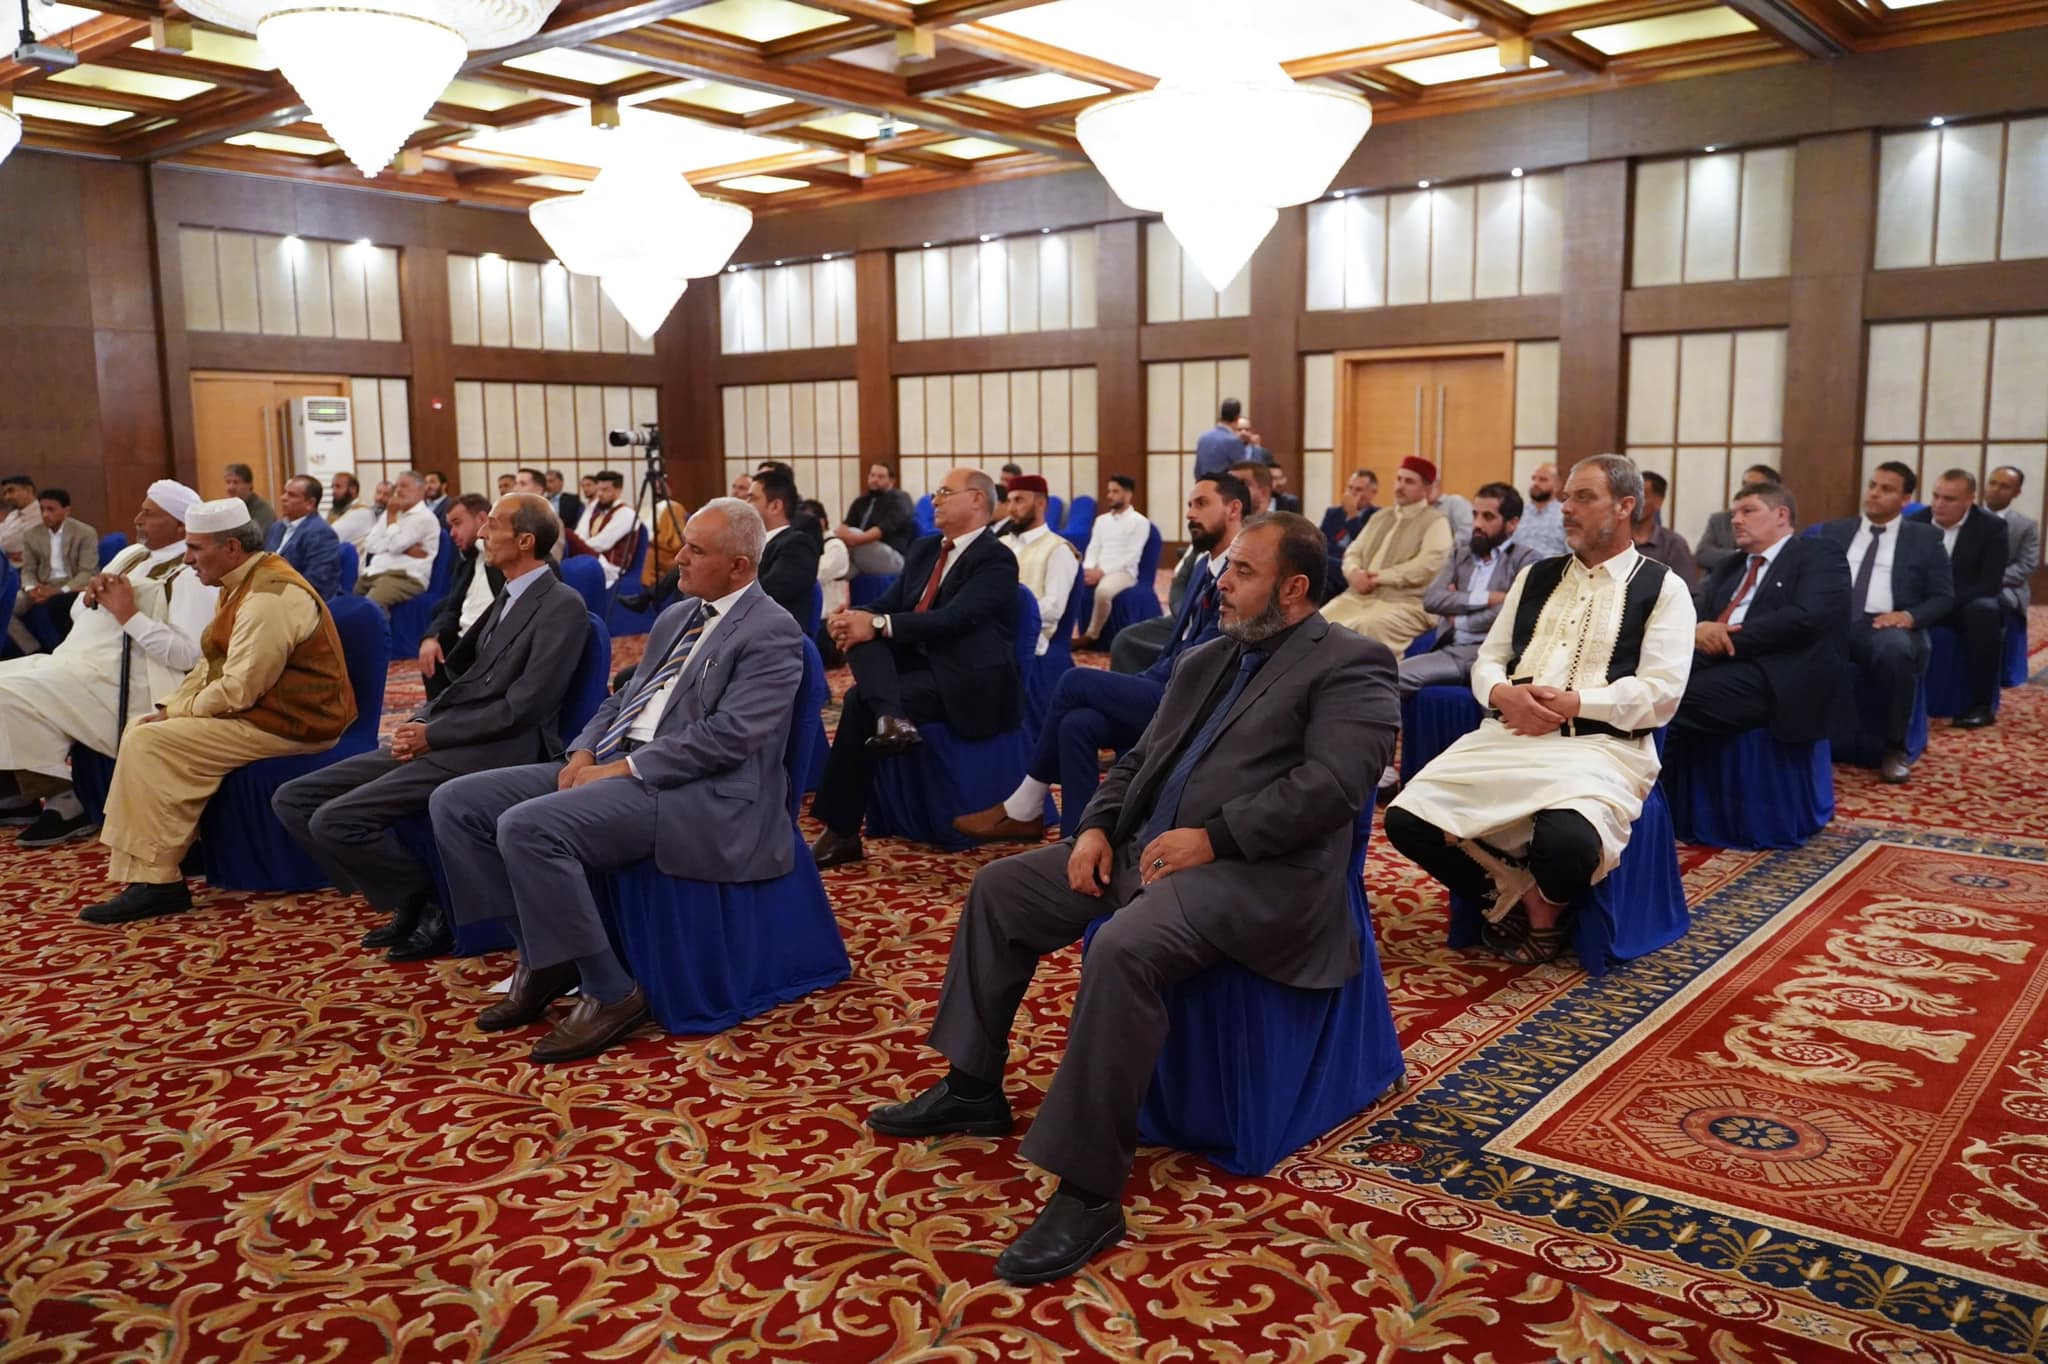 Al Mnefi discusses with delegation of notables, elders, elites and youth of Cyrenaica realization of the aspirations of Libyans and the arrival of elections as soon as possible.